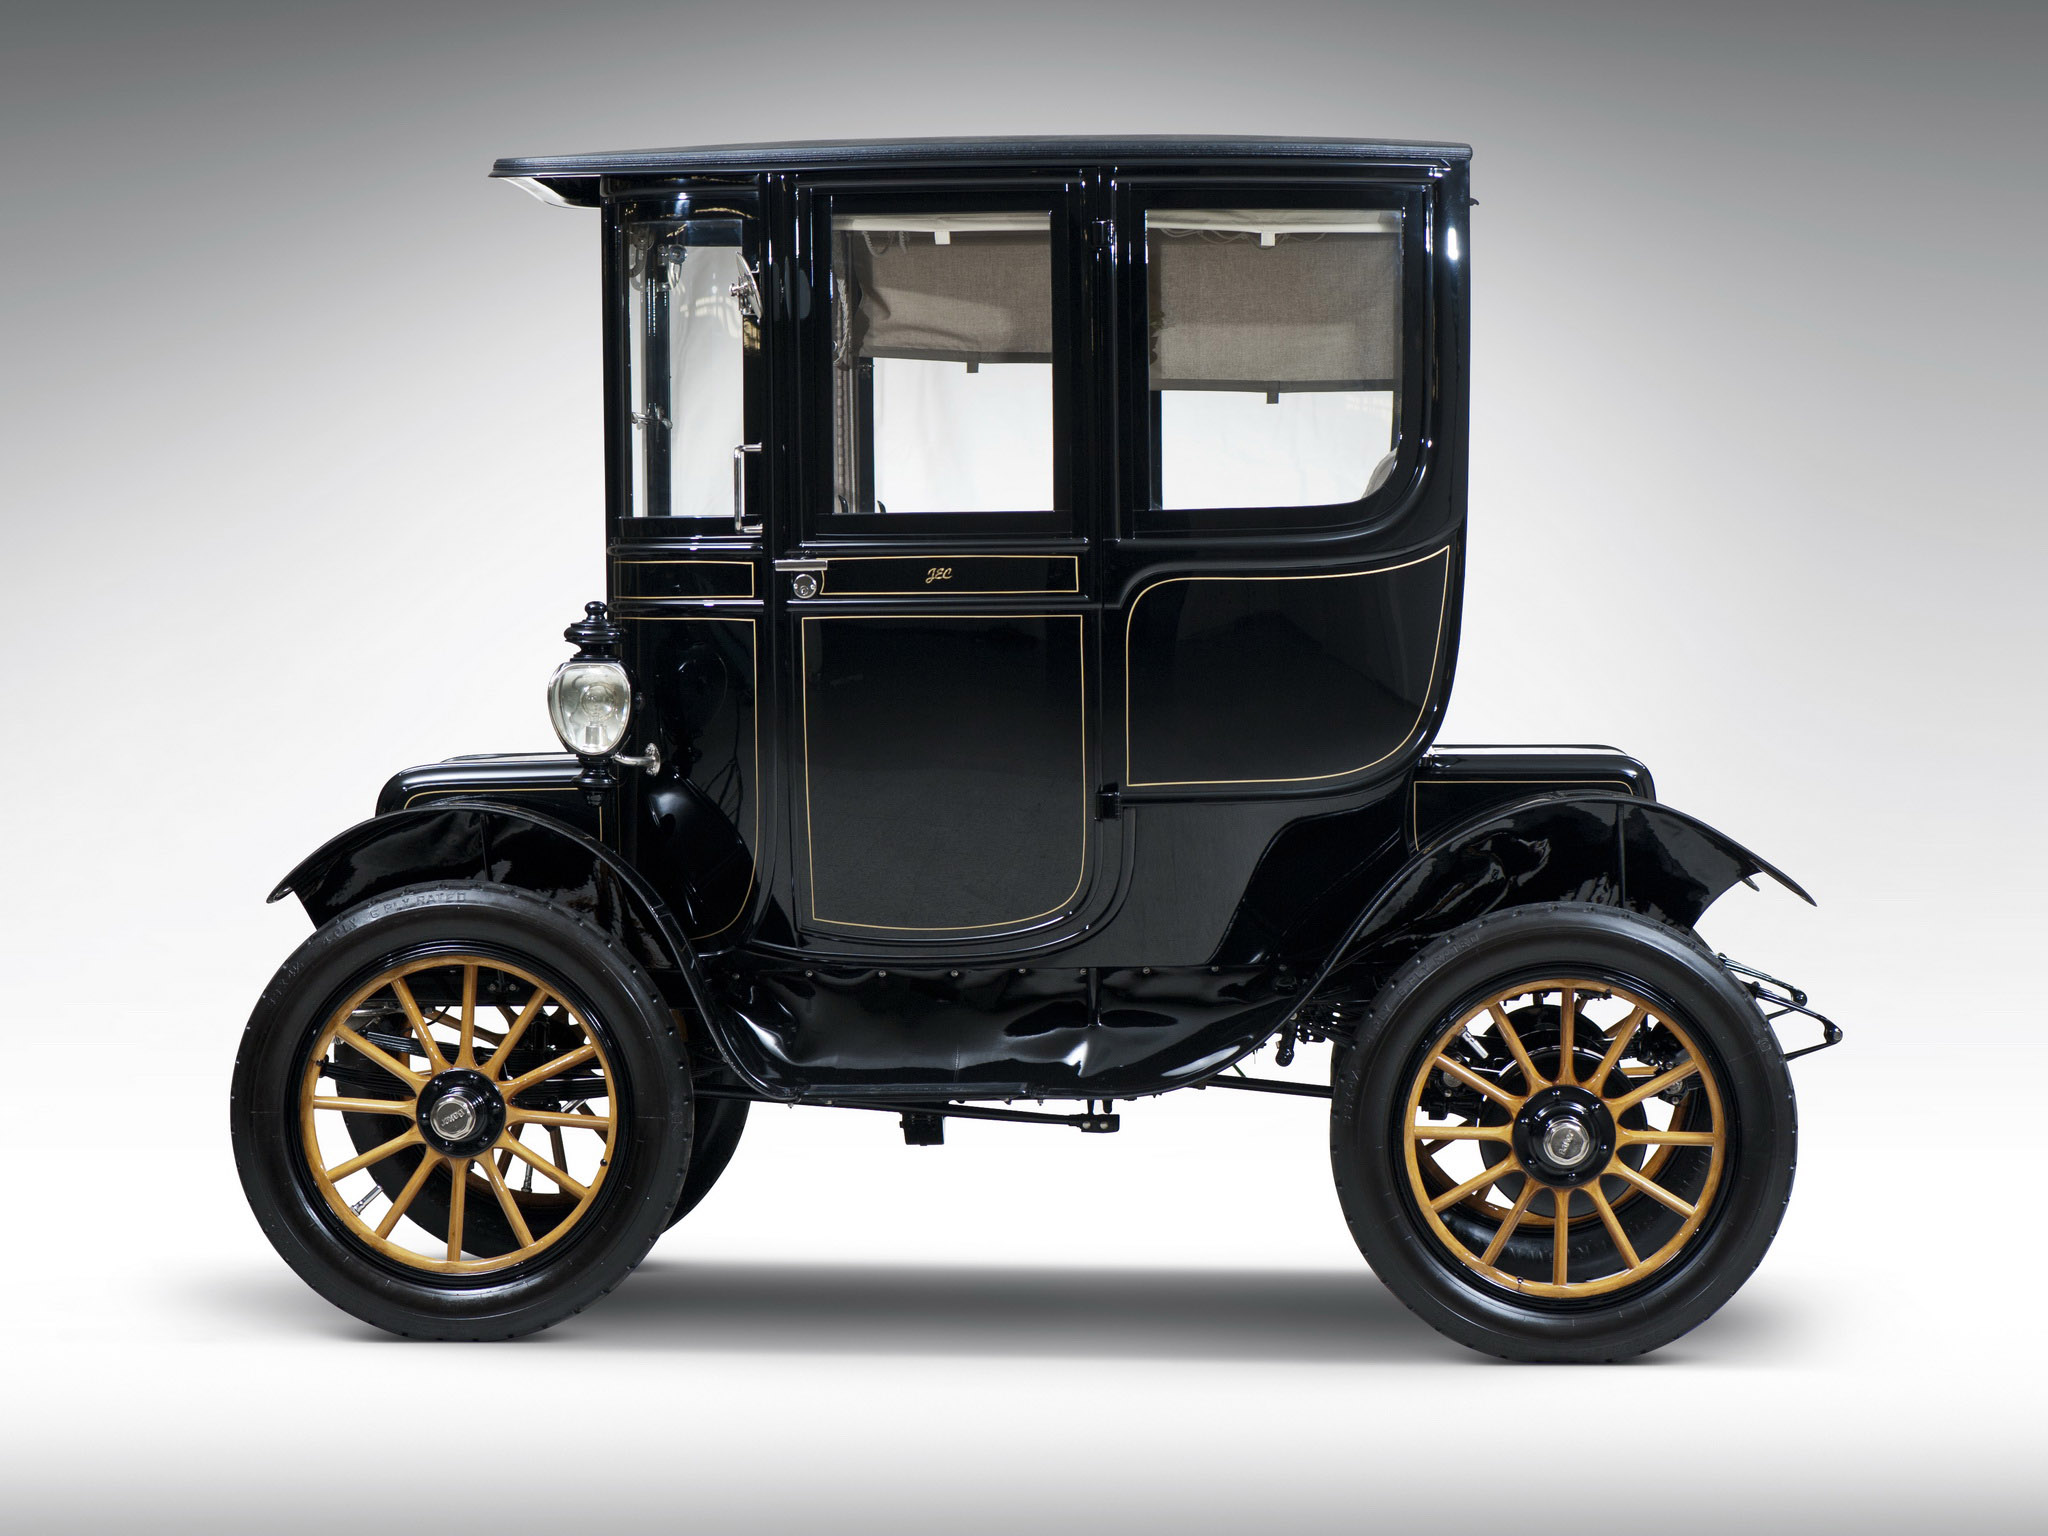 1912, Baker, Electric, Model v, Special, Extension, Coupe, Retro